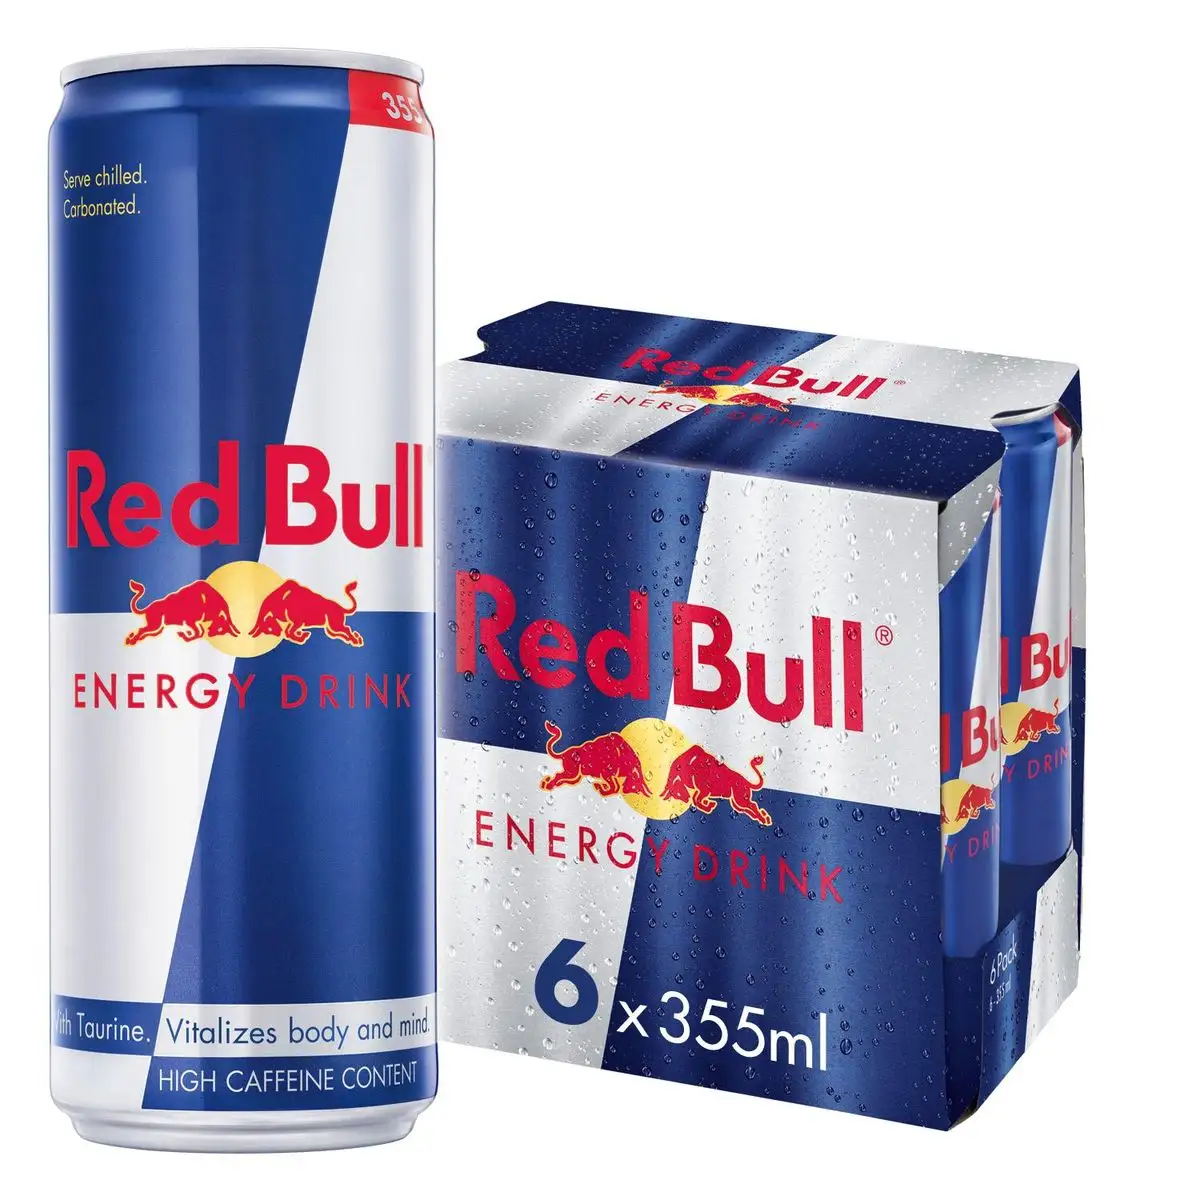 High quality Discount Offer Original Red Bull 250ml Energy Drink Ready To Export Redbull